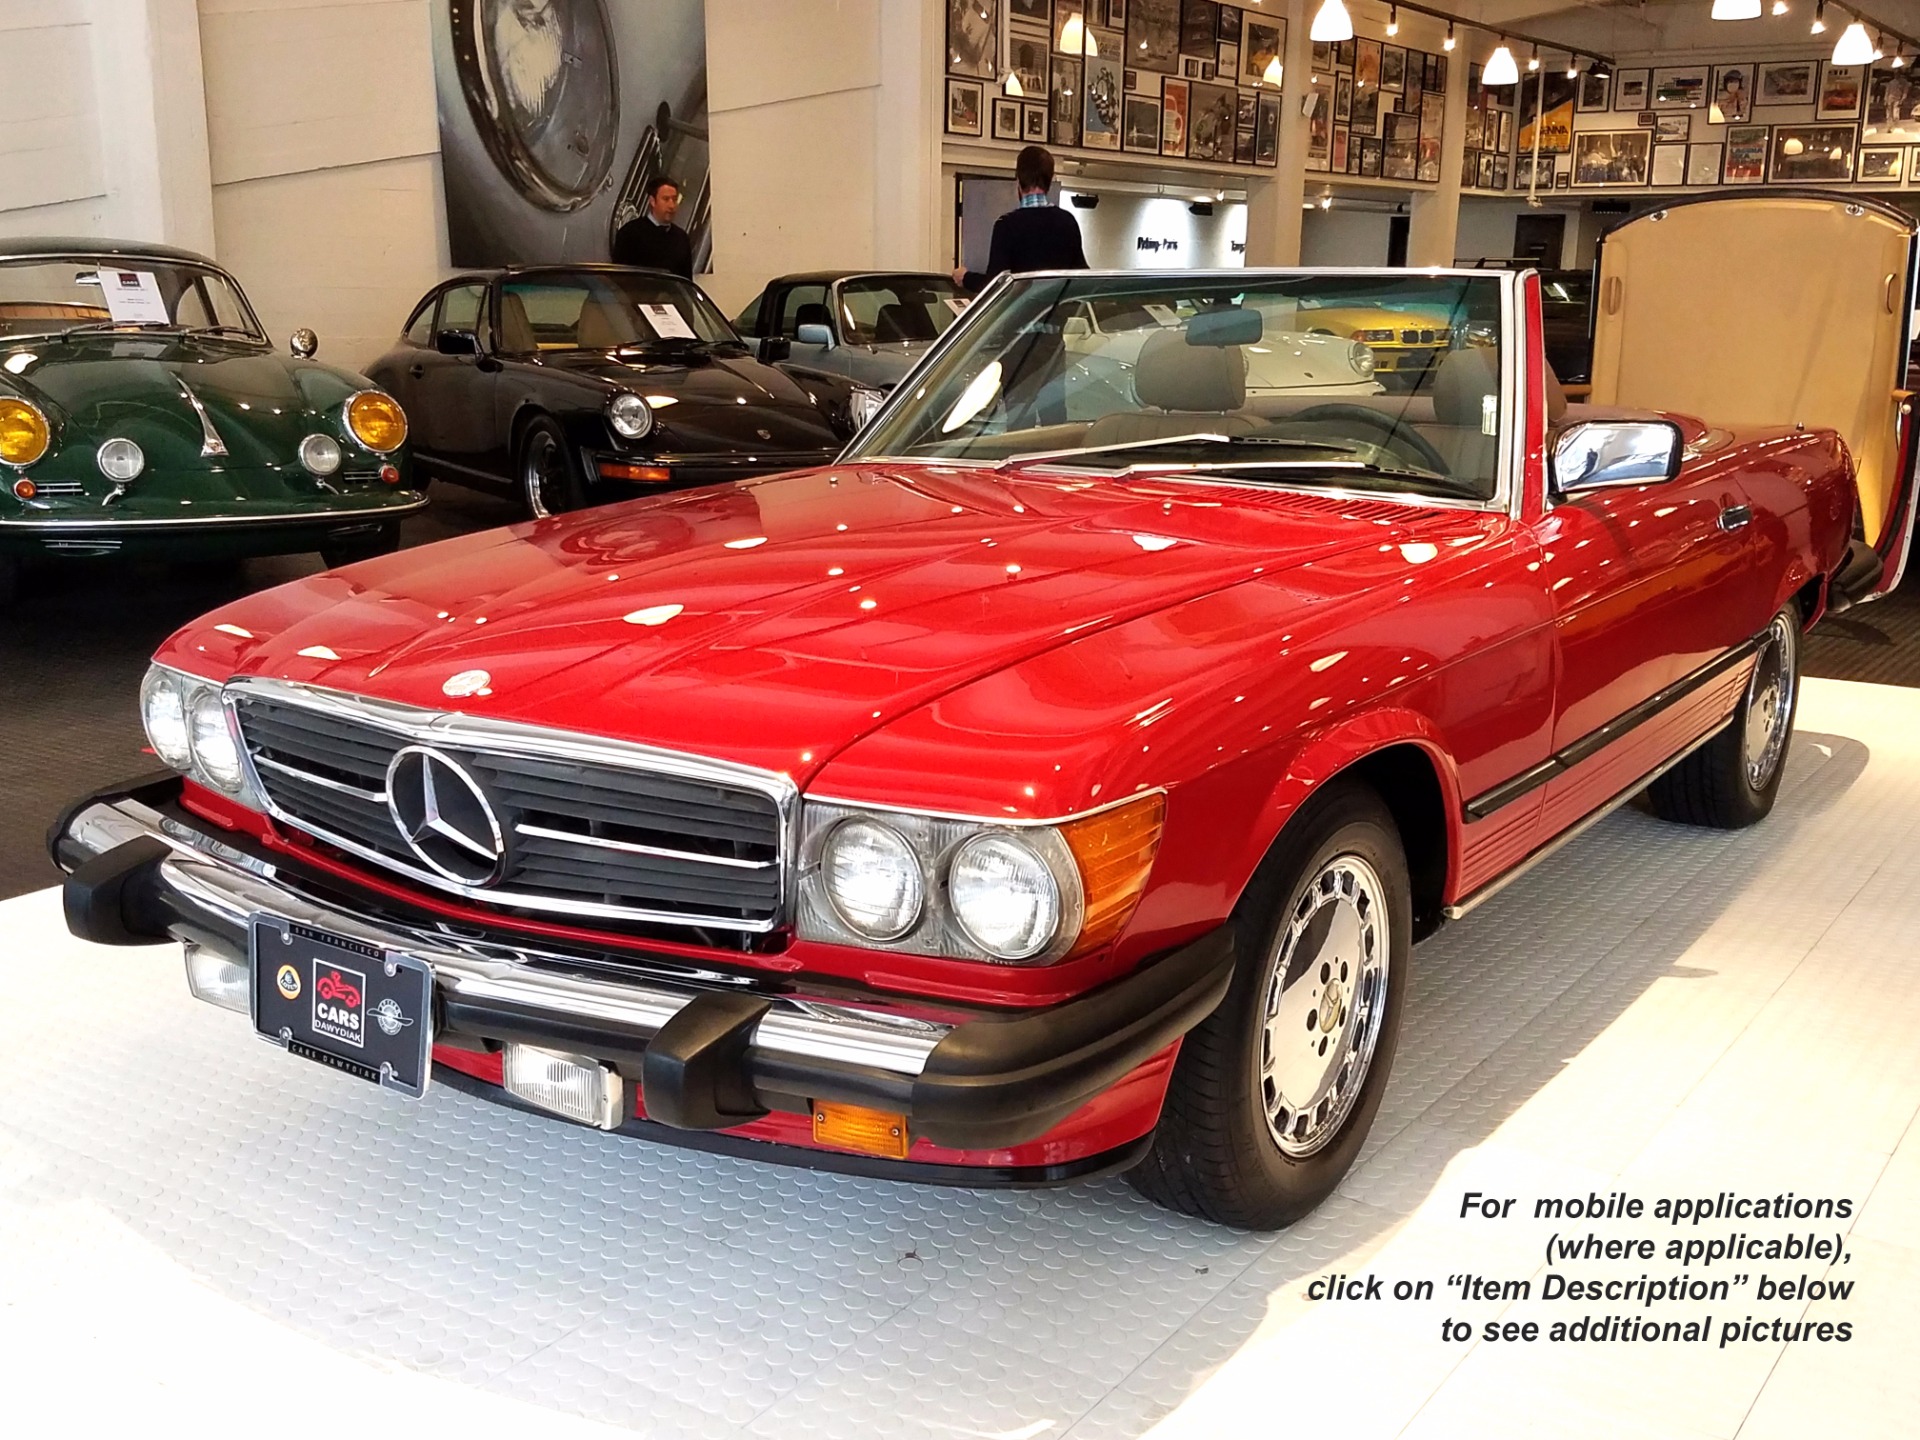 Used 1987 Mercedes Benz 560 Class 560sl For Sale 12 900 Cars Dawydiak Stock 16